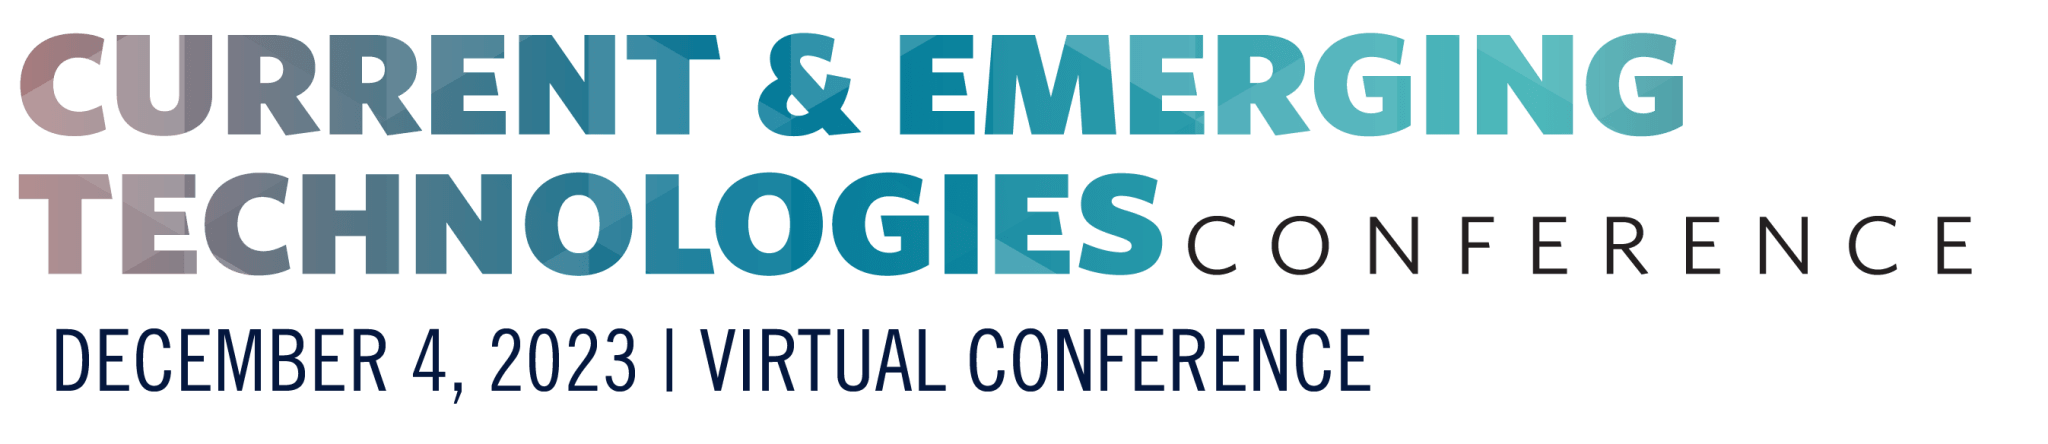 Current and Emerging Technology Conference Header Title Graphic Asset